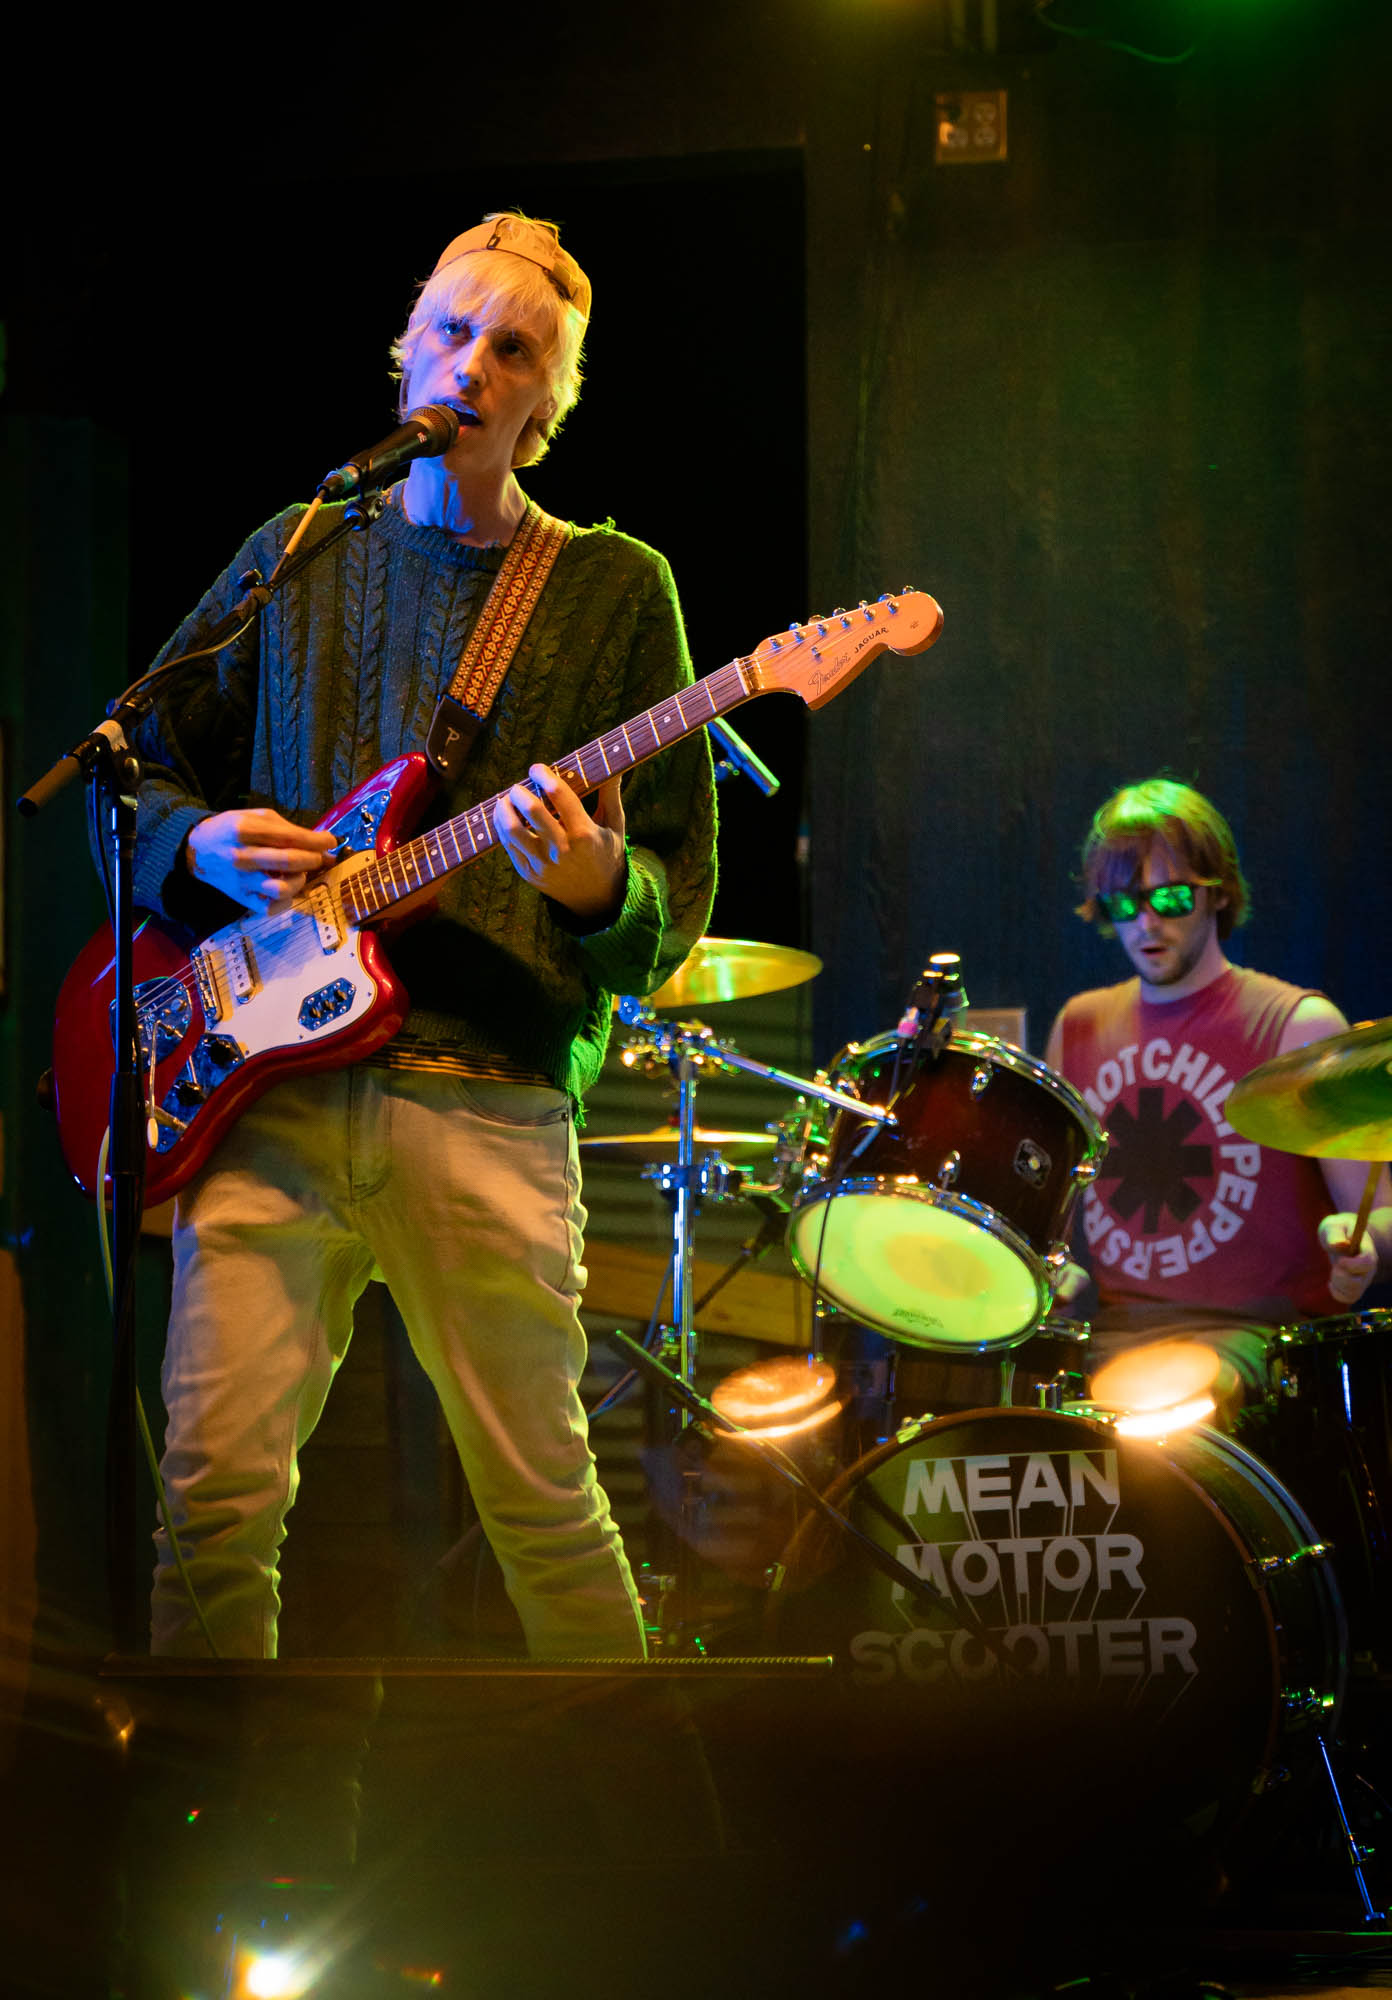 A musician on stage playing guitar and singing and a drummer